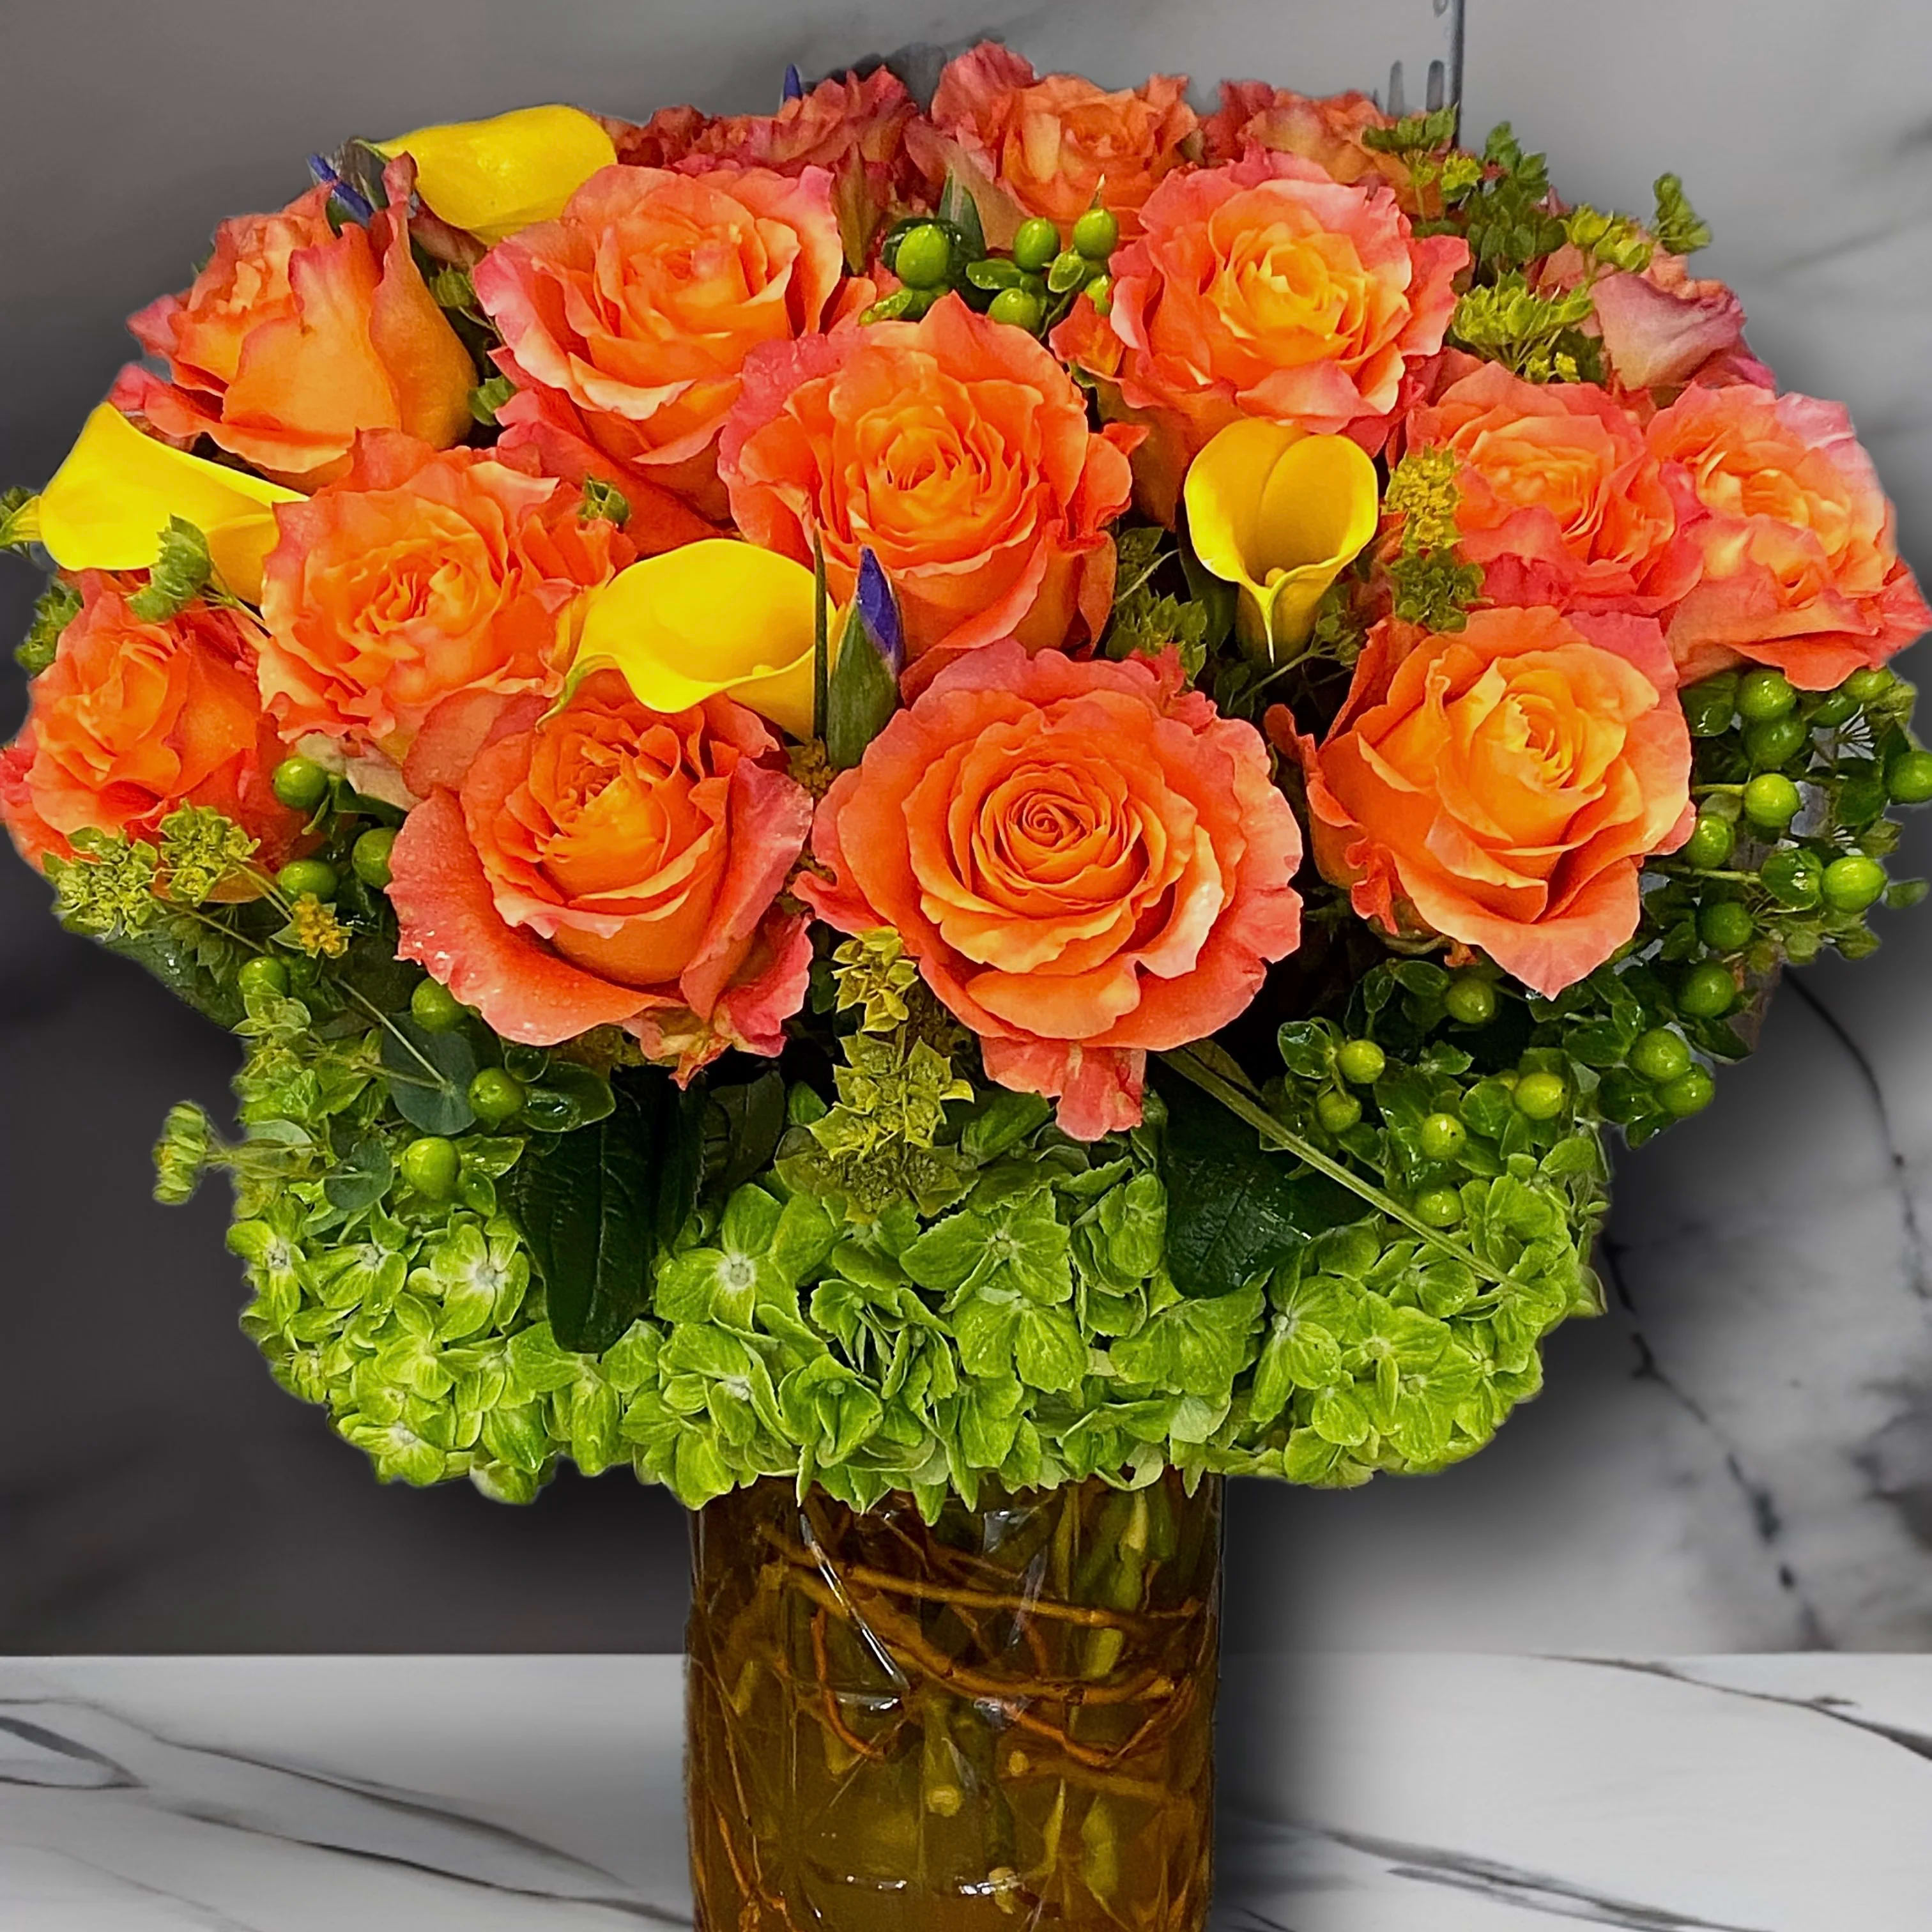 Tequila Sunrise! - Take a shot of this beautiful, bright, elevated vase arrangement filled one dozen vibrant orange roses, sunshine, yellow calla lilies, &amp; gorgeous green hydrangea, this unique vase arrangement is sure to brighten up anyone’s day! Also featuring bright, green coffee, bean &amp; branches in the water. (Vase is subject to change, depending on availability) 